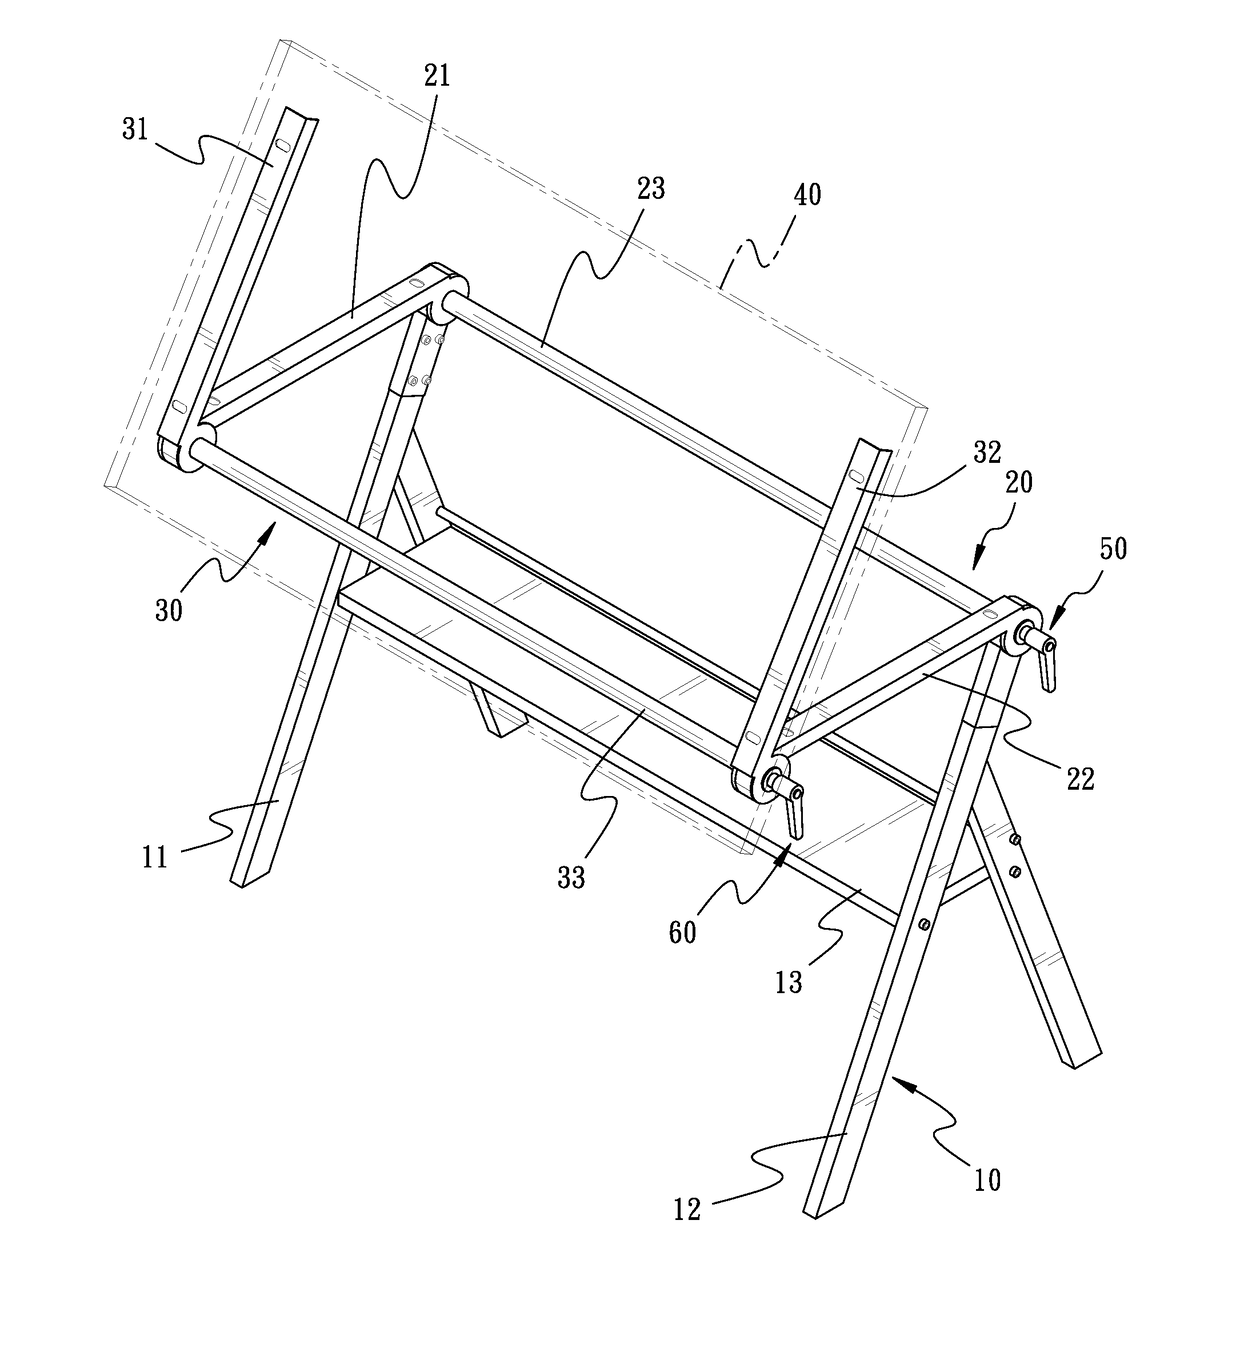 Table with adjustable height and inclination